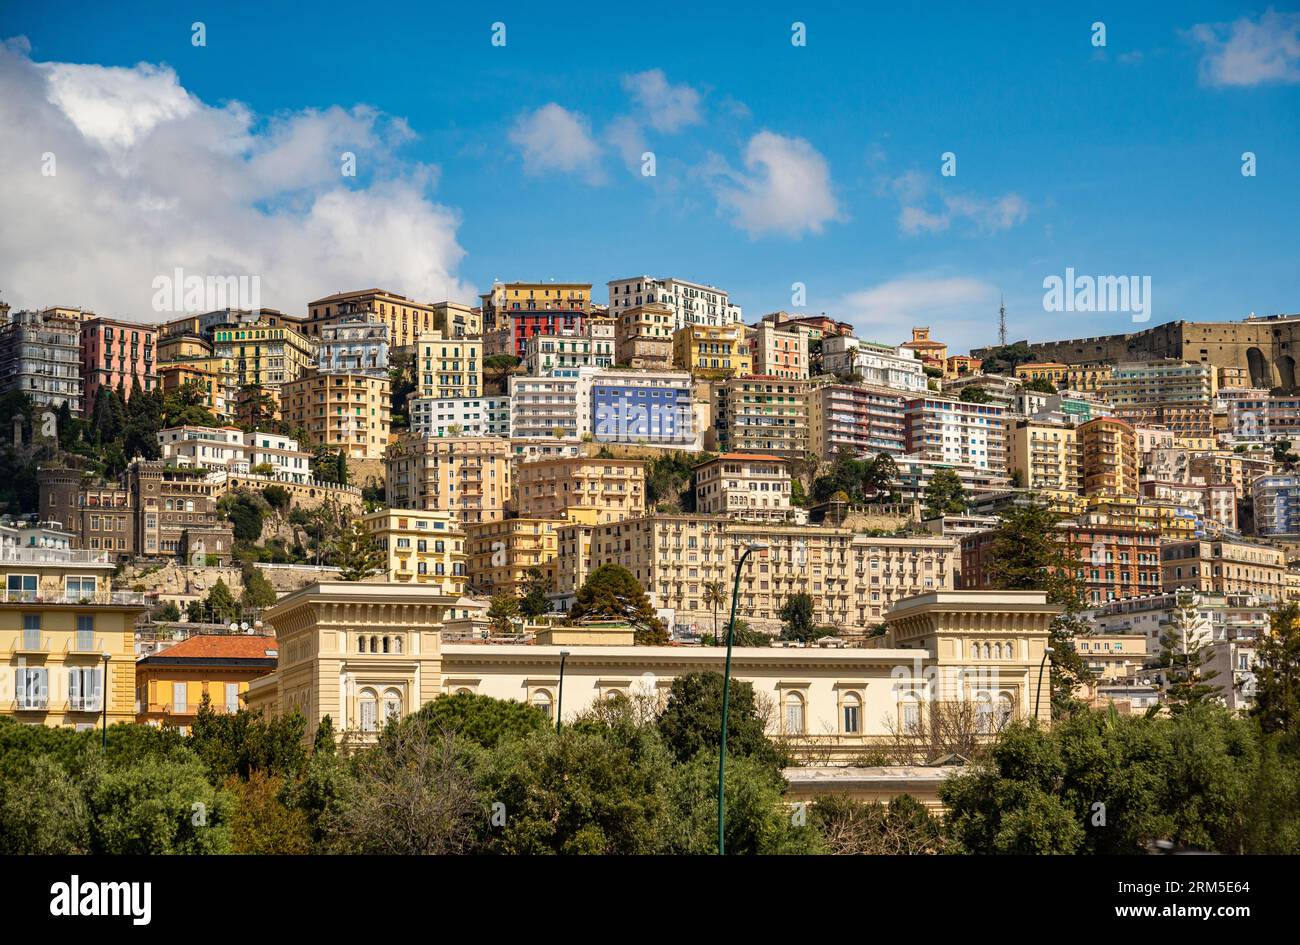 City of Naples seen from the seafront of Naples in Italy Stock Photo